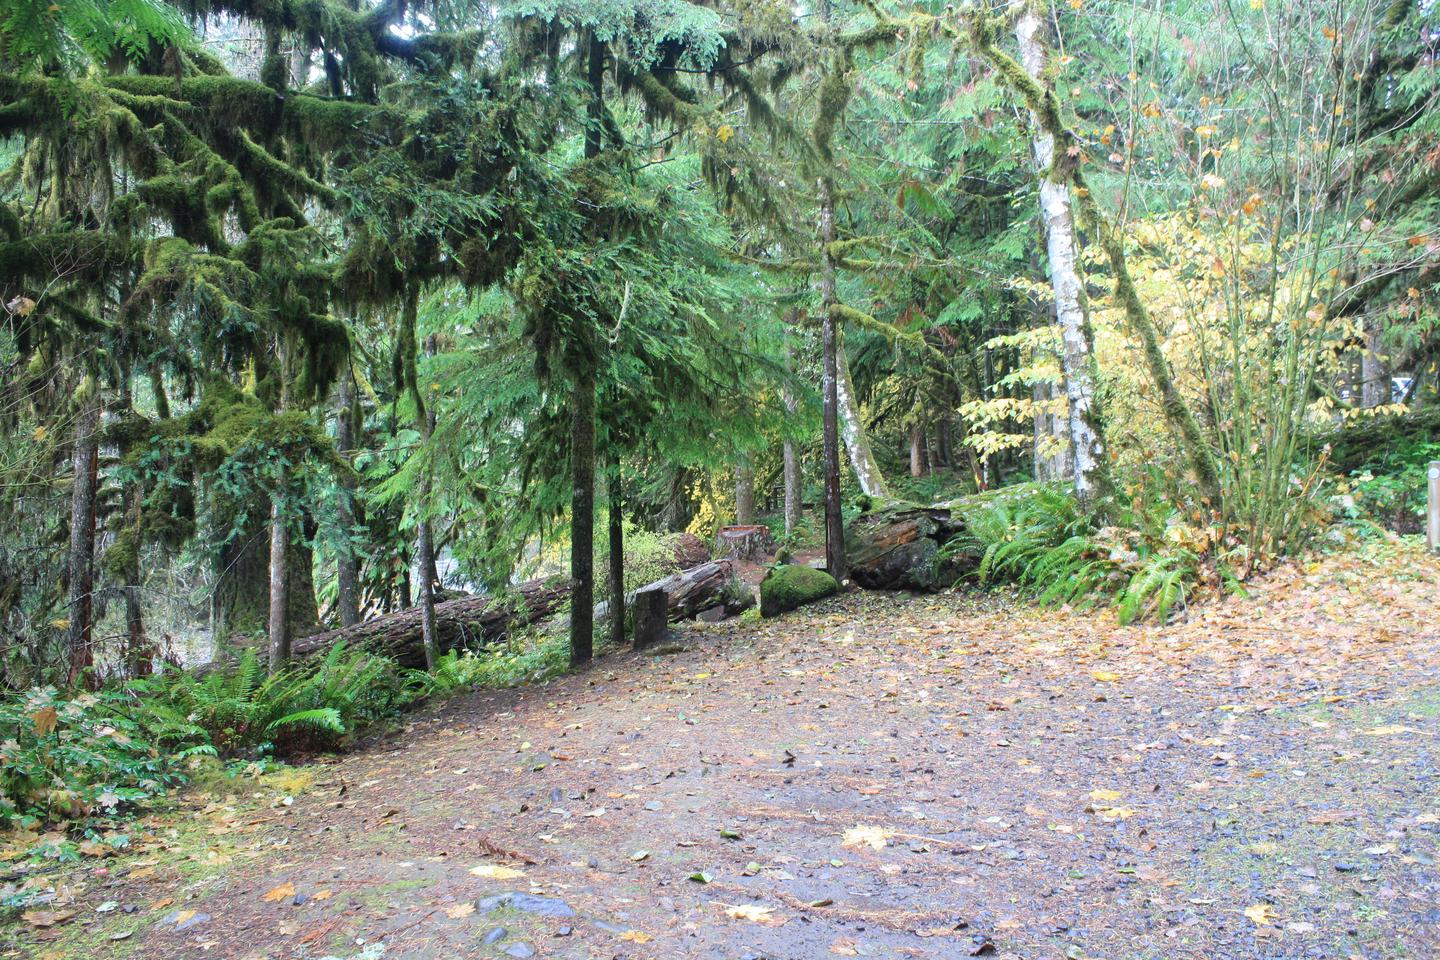 House Rock Campground located in the Willamette National Forest.House Rock - Site 12